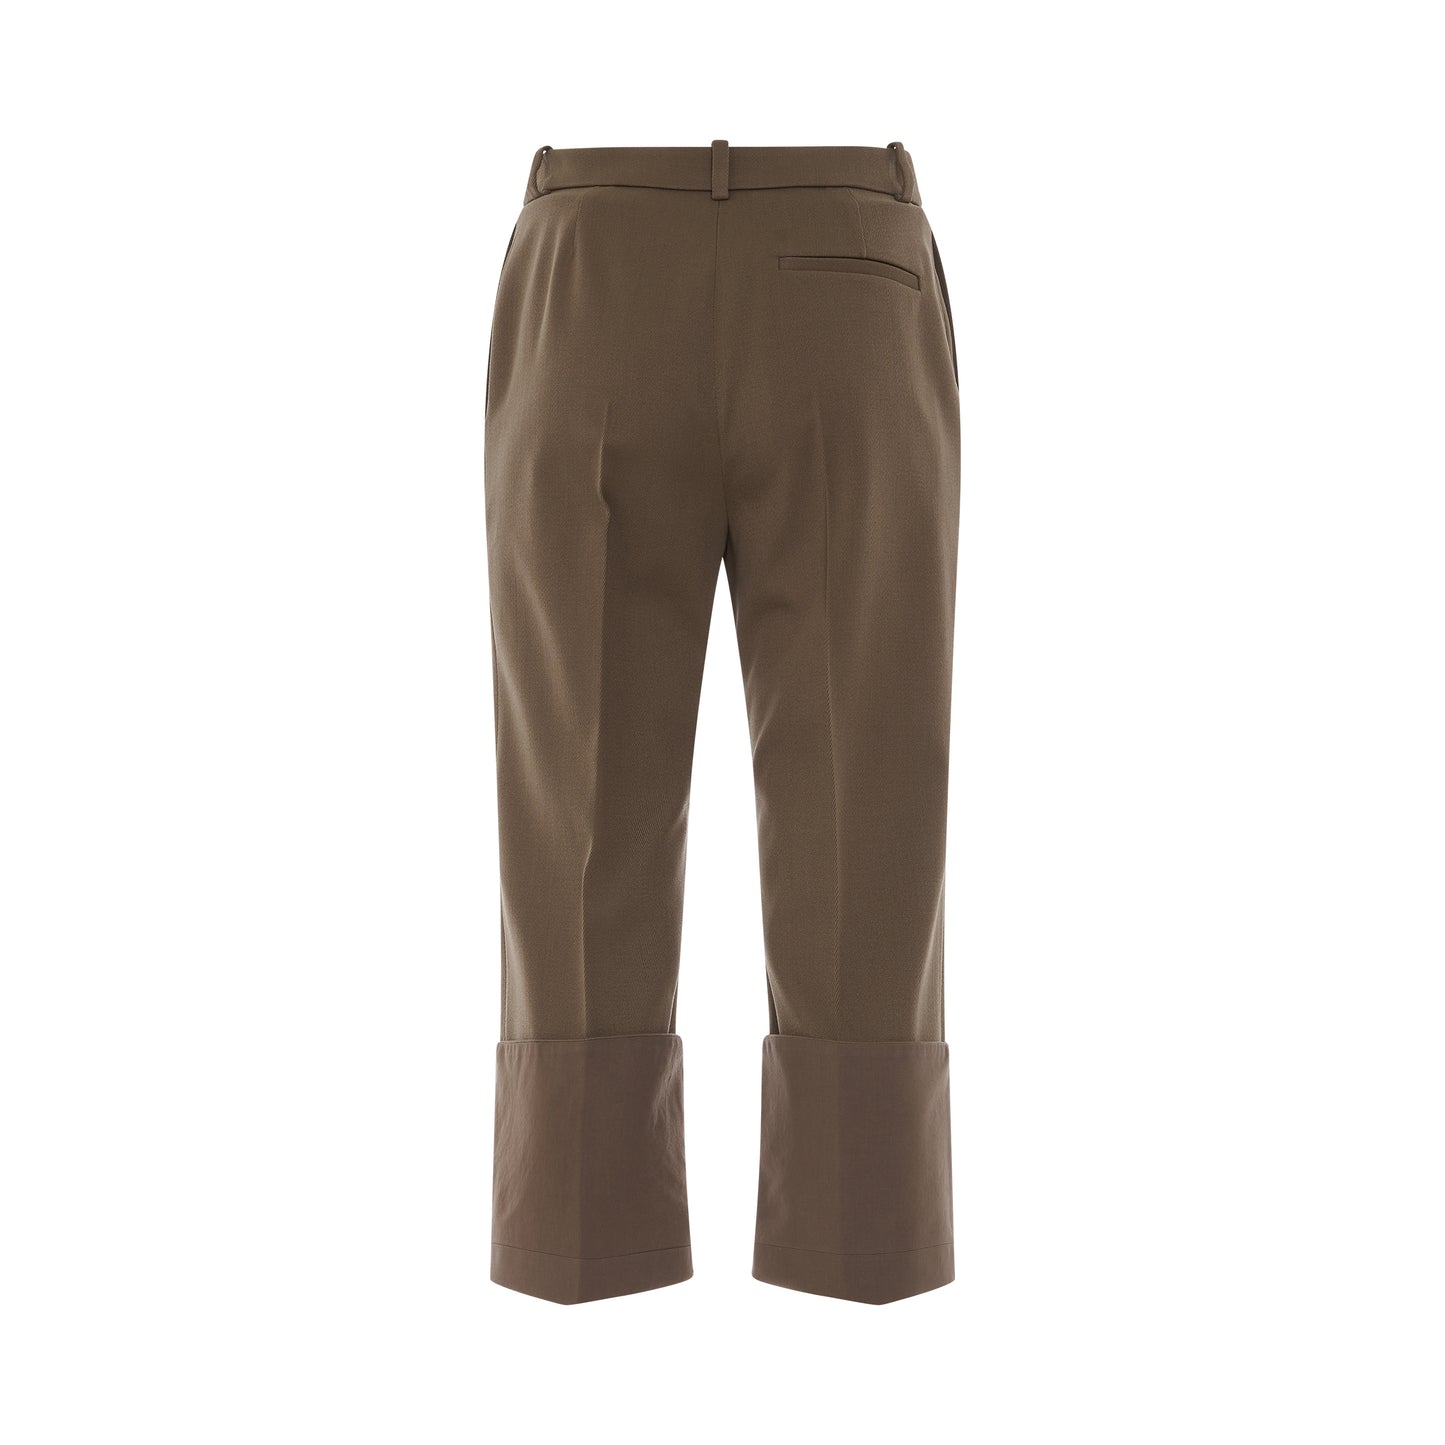 Cropped Turn Up Trousers in Beige